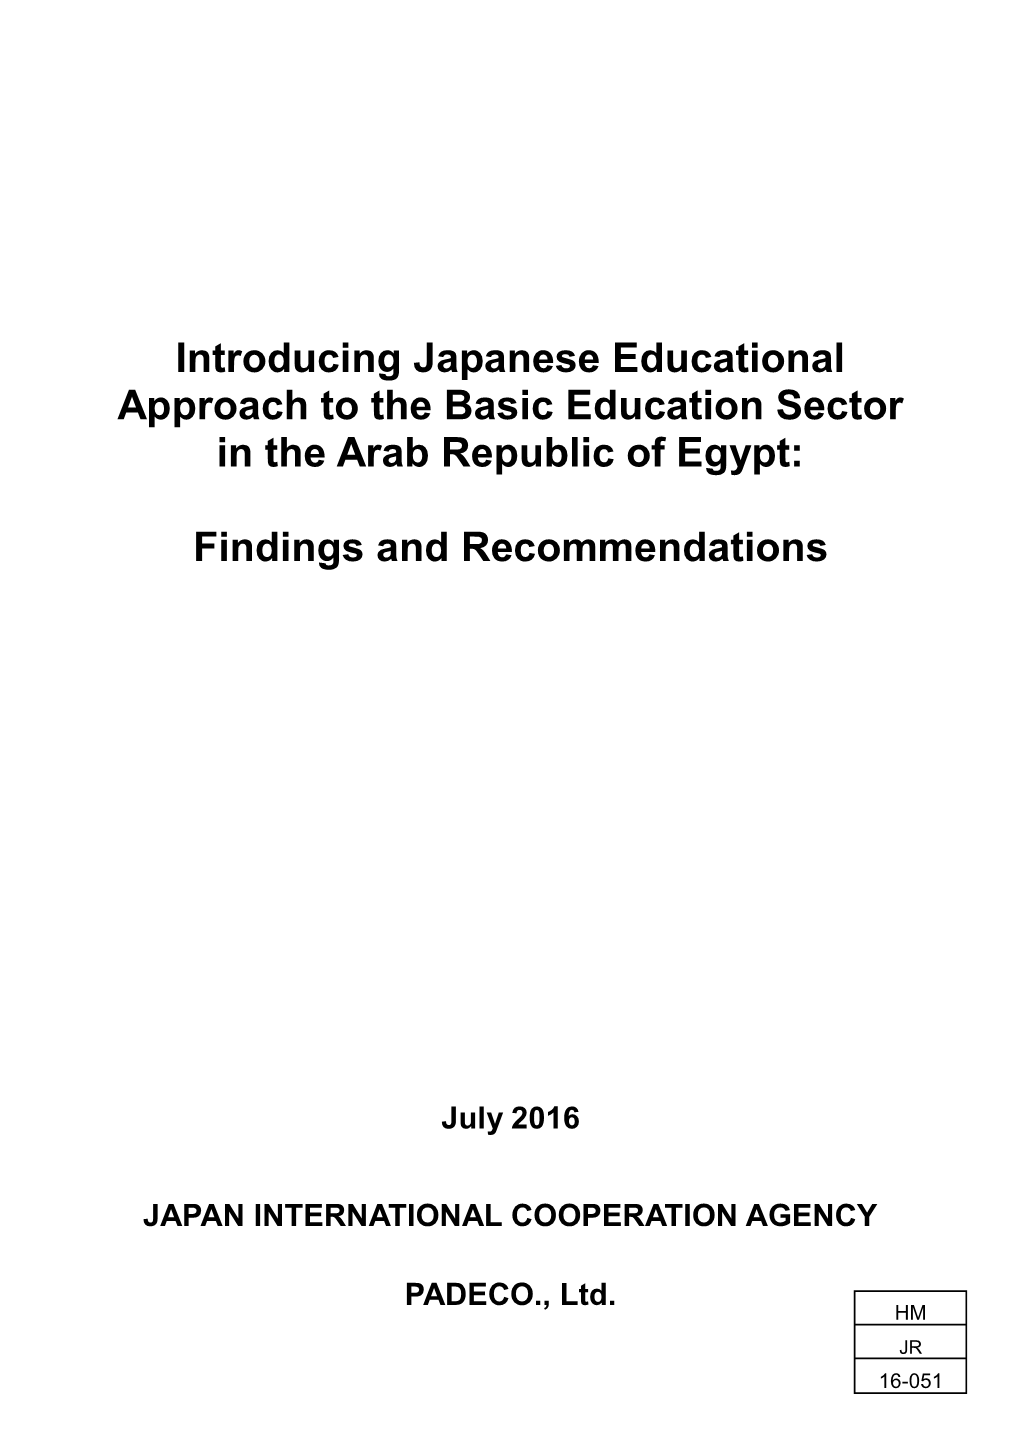 Introducing Japanese Educational Approach to the Basic Education Sector in the Arab Republic of Egypt